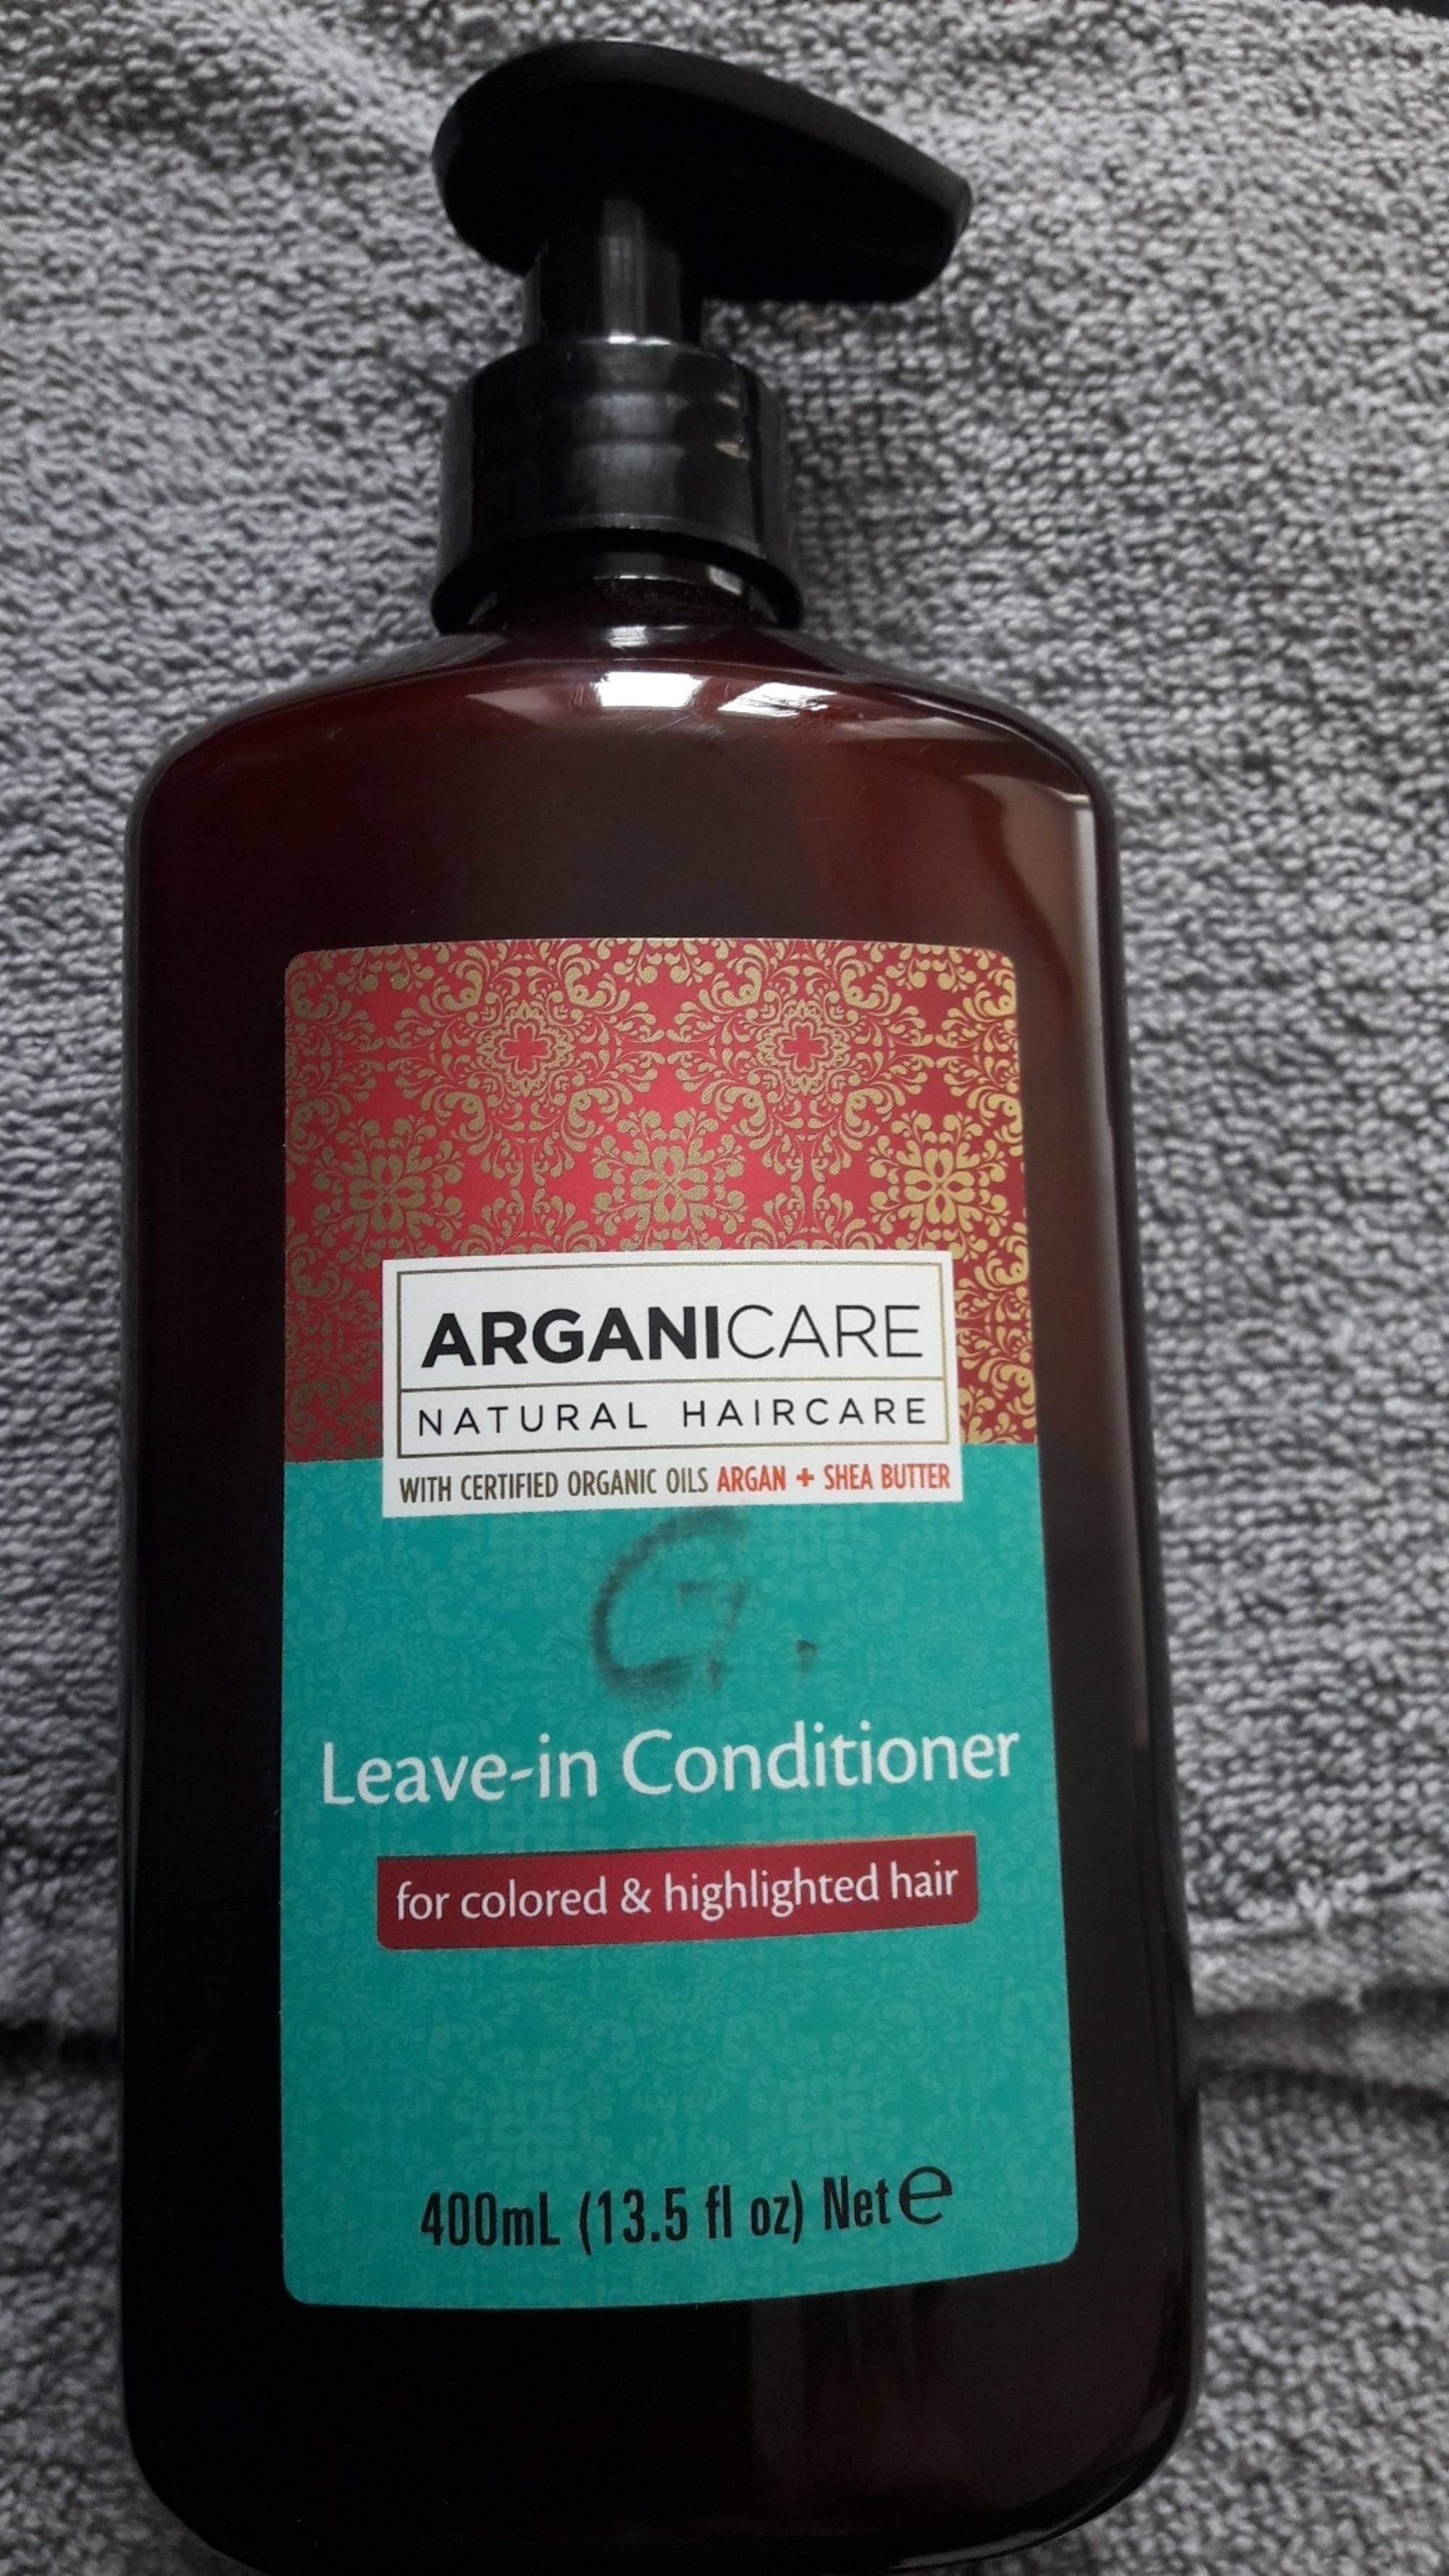 ARGANICARE - Leave-in conditioner for colored & highlighted hair